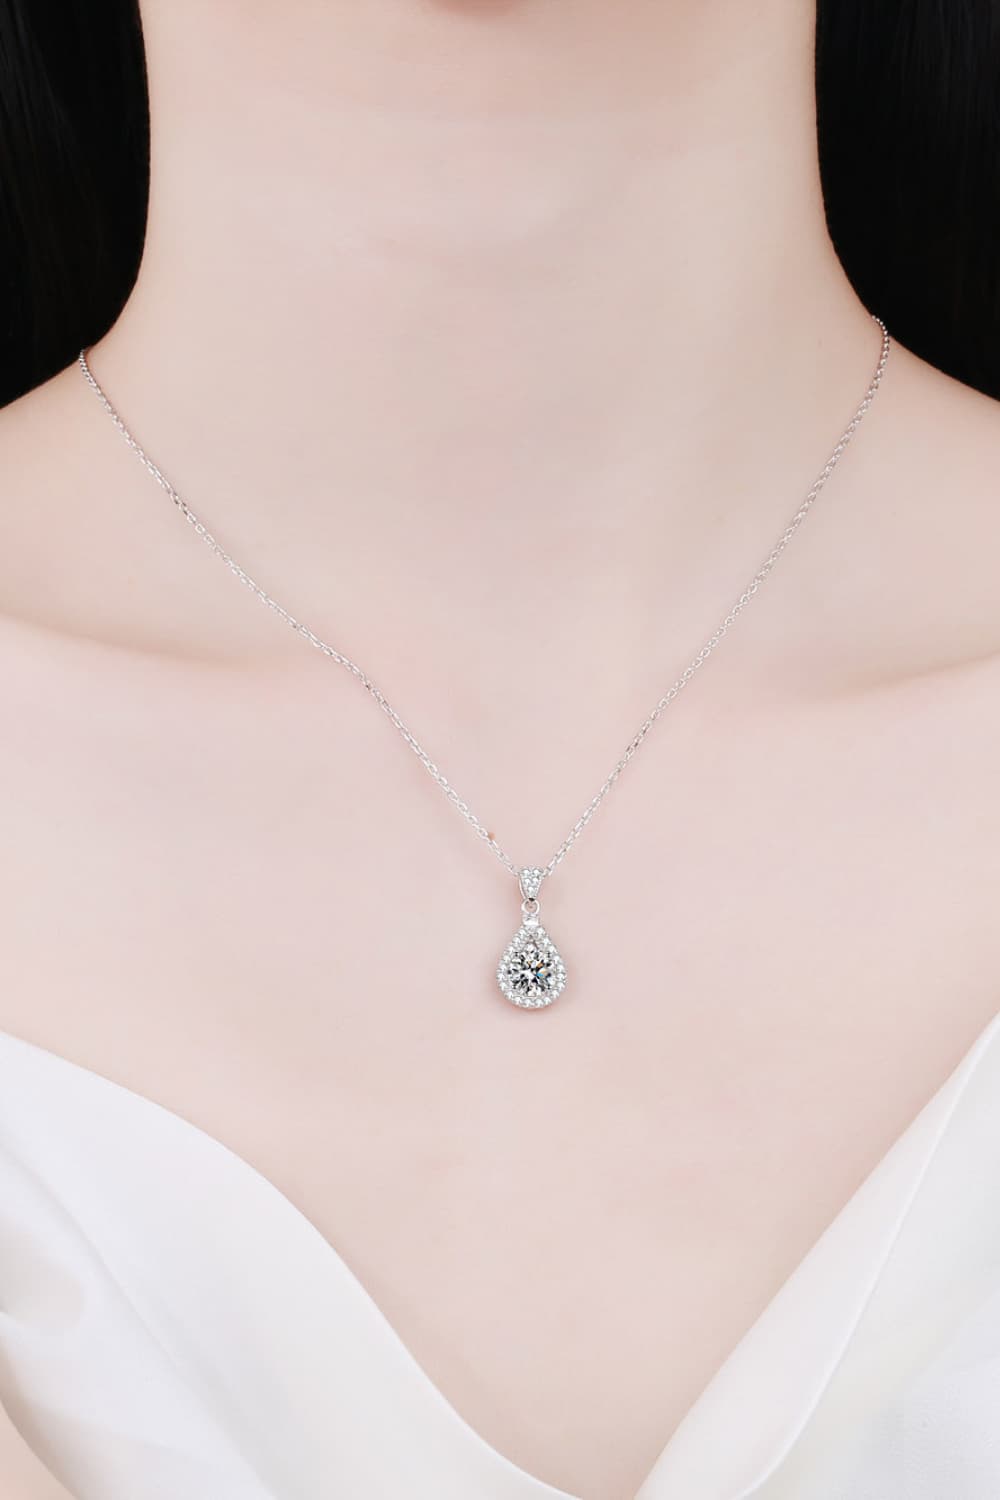 2 Carat Moissanite Teardrop Pendant 925 Sterling Silver Necklace - Necklaces - FITGGINS